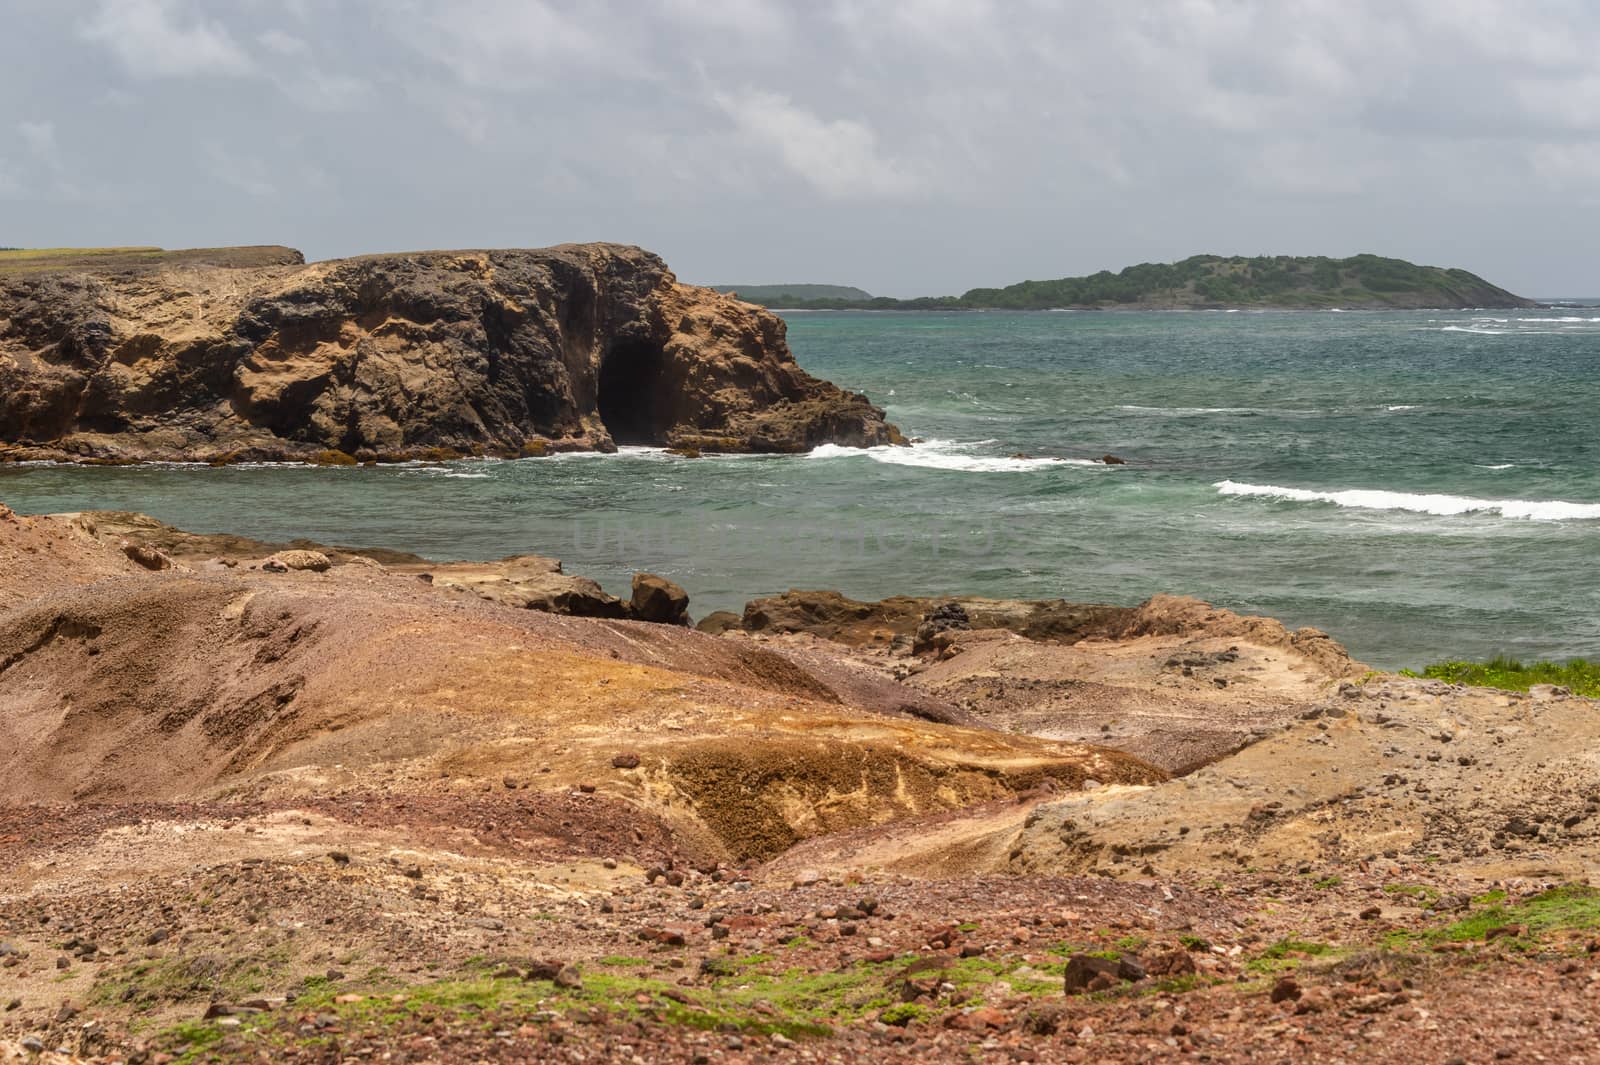 Savanna of Petrifications in Martinique by mbruxelle